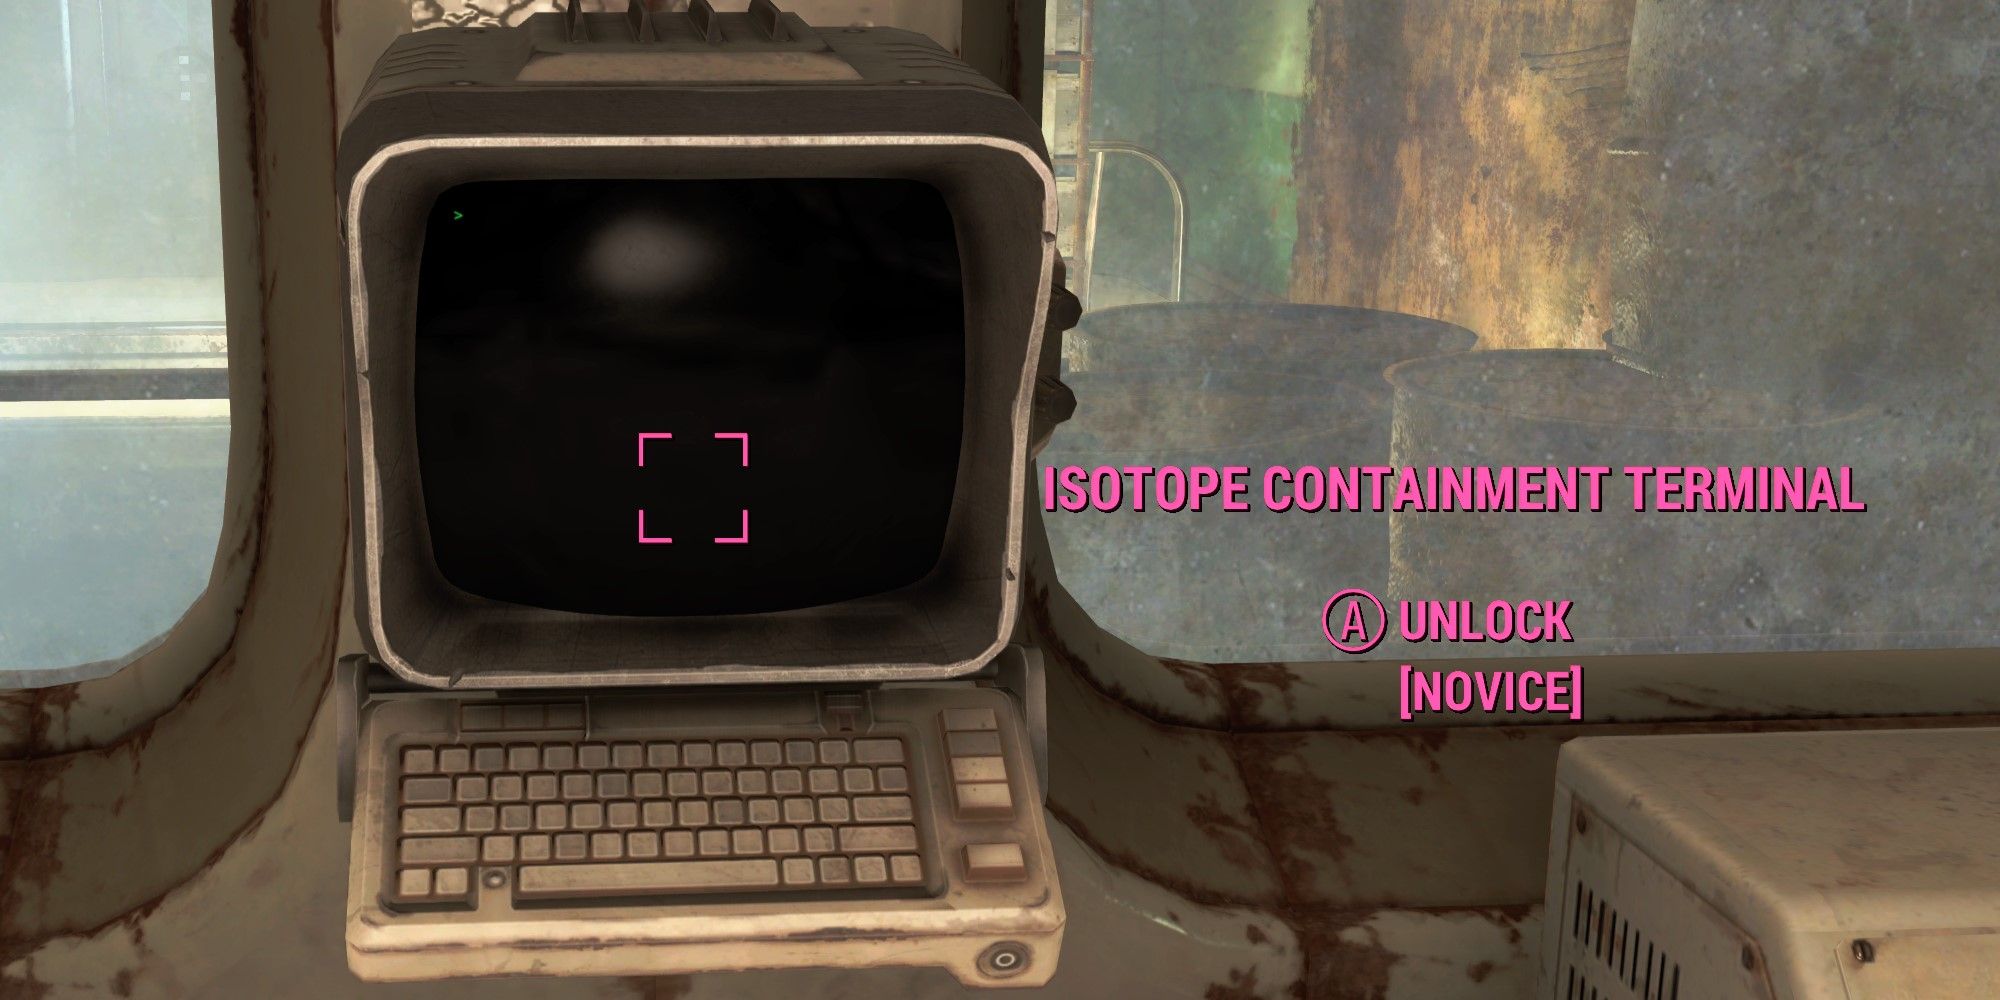 Fallout 4 Cambridge Polymer Labs Small Screen Of Isotope Containment Terminal